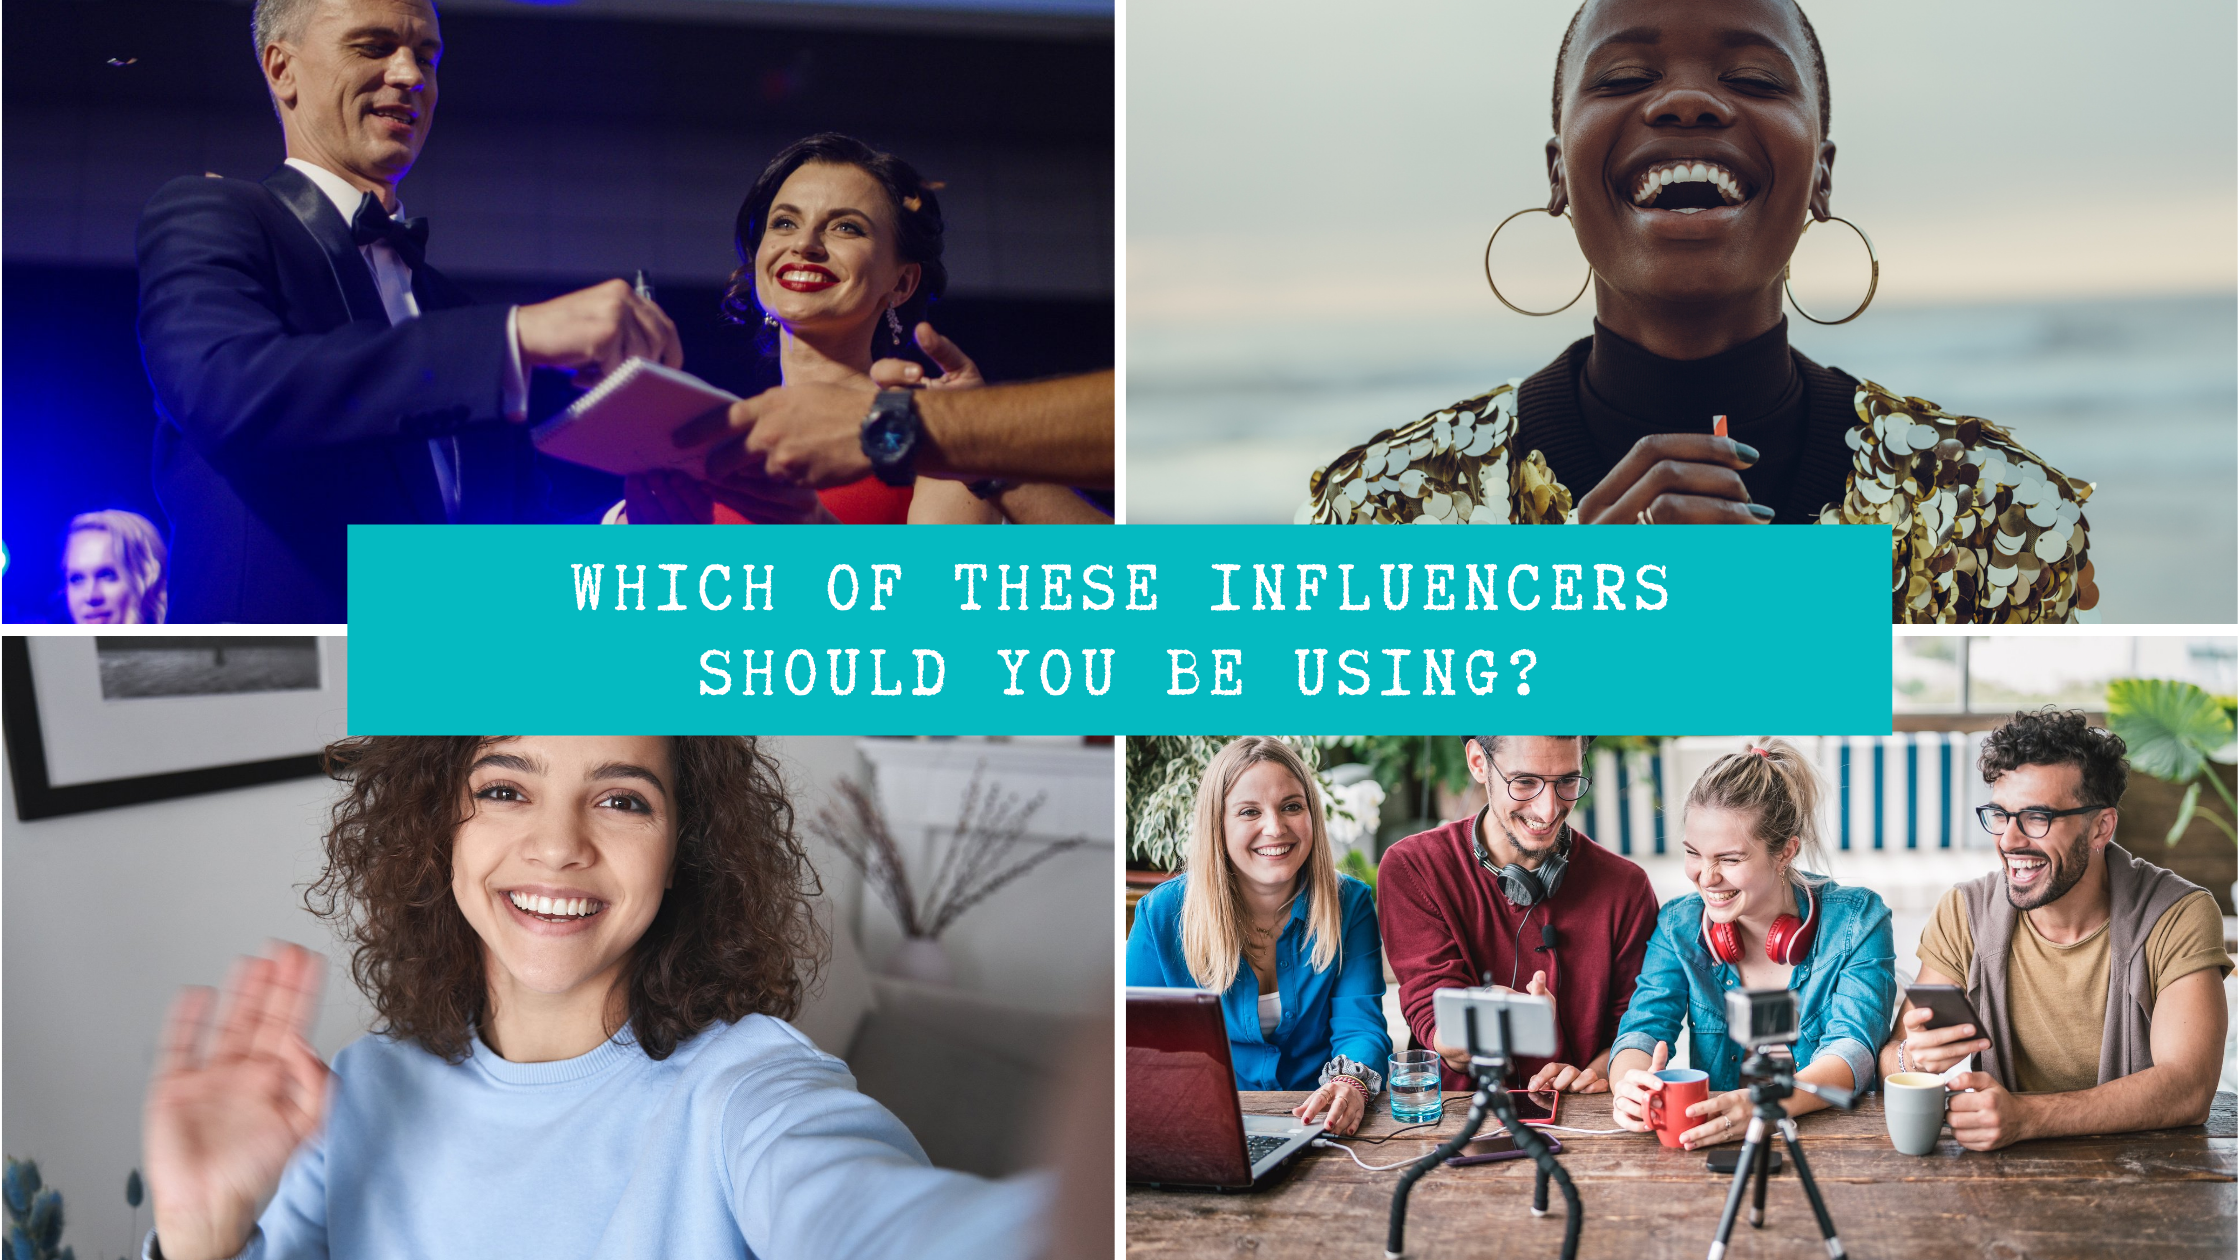 The 4 Influencer Types: Does Size Really Matter?